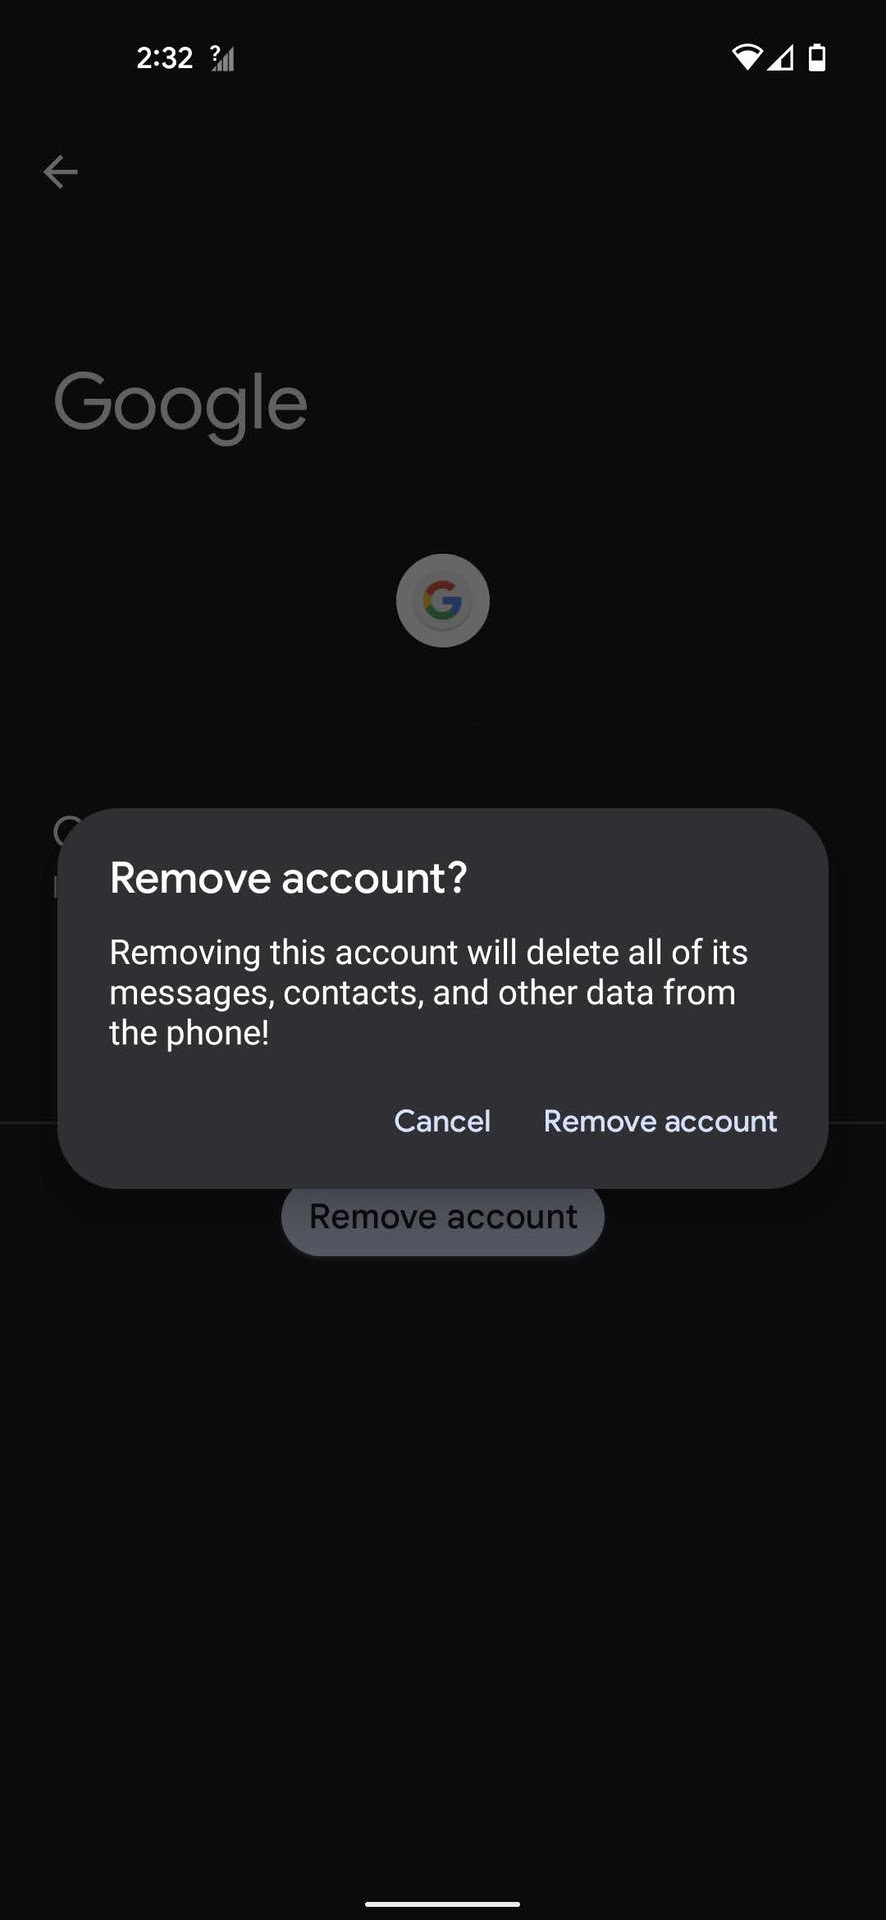 How to remove a Google account on Android 4